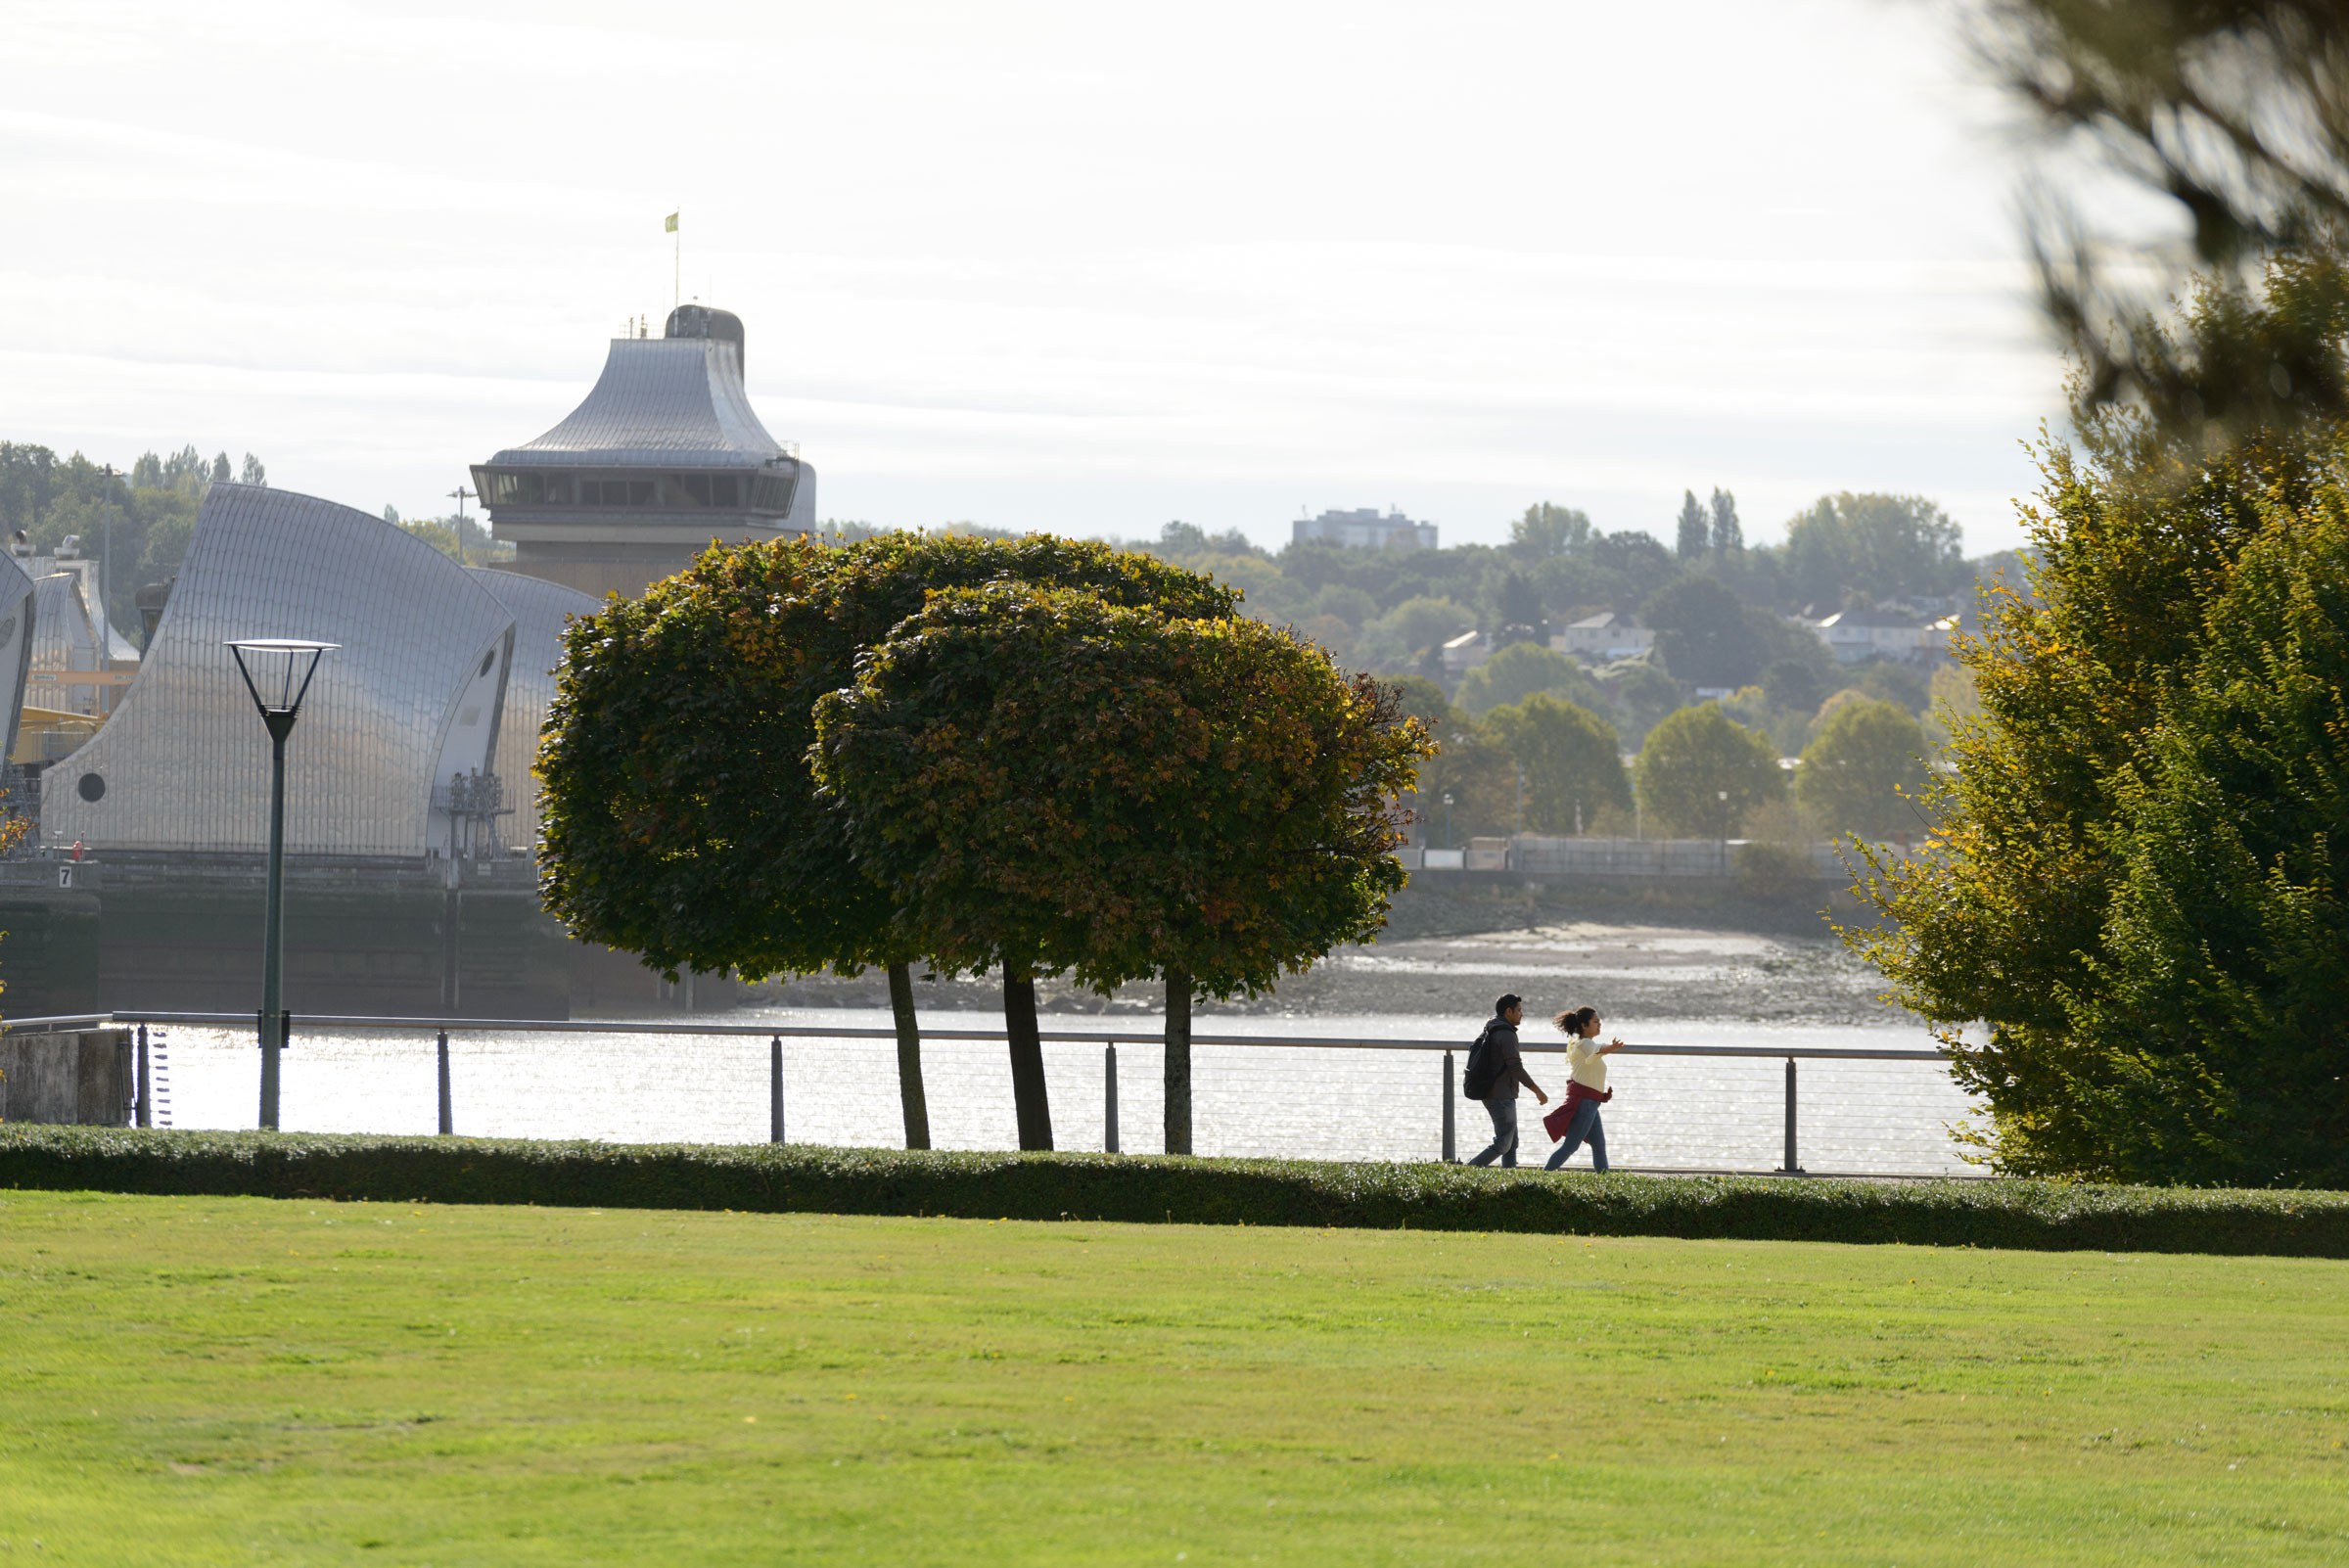 People walking in Thames Barrier Park with the river as backdrop